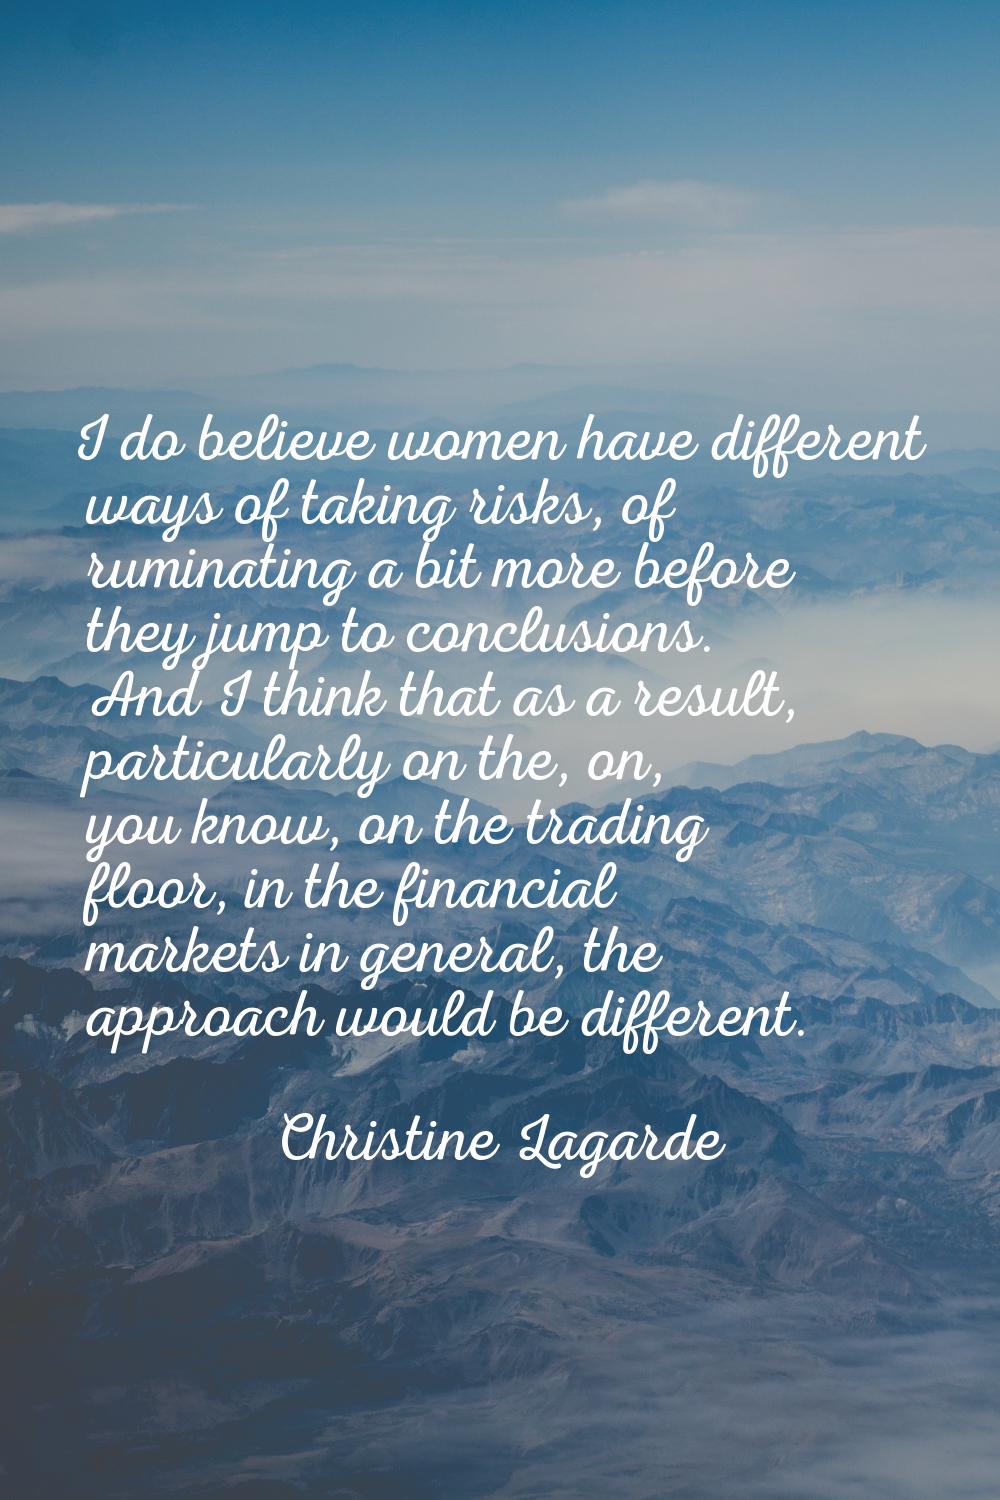 I do believe women have different ways of taking risks, of ruminating a bit more before they jump t